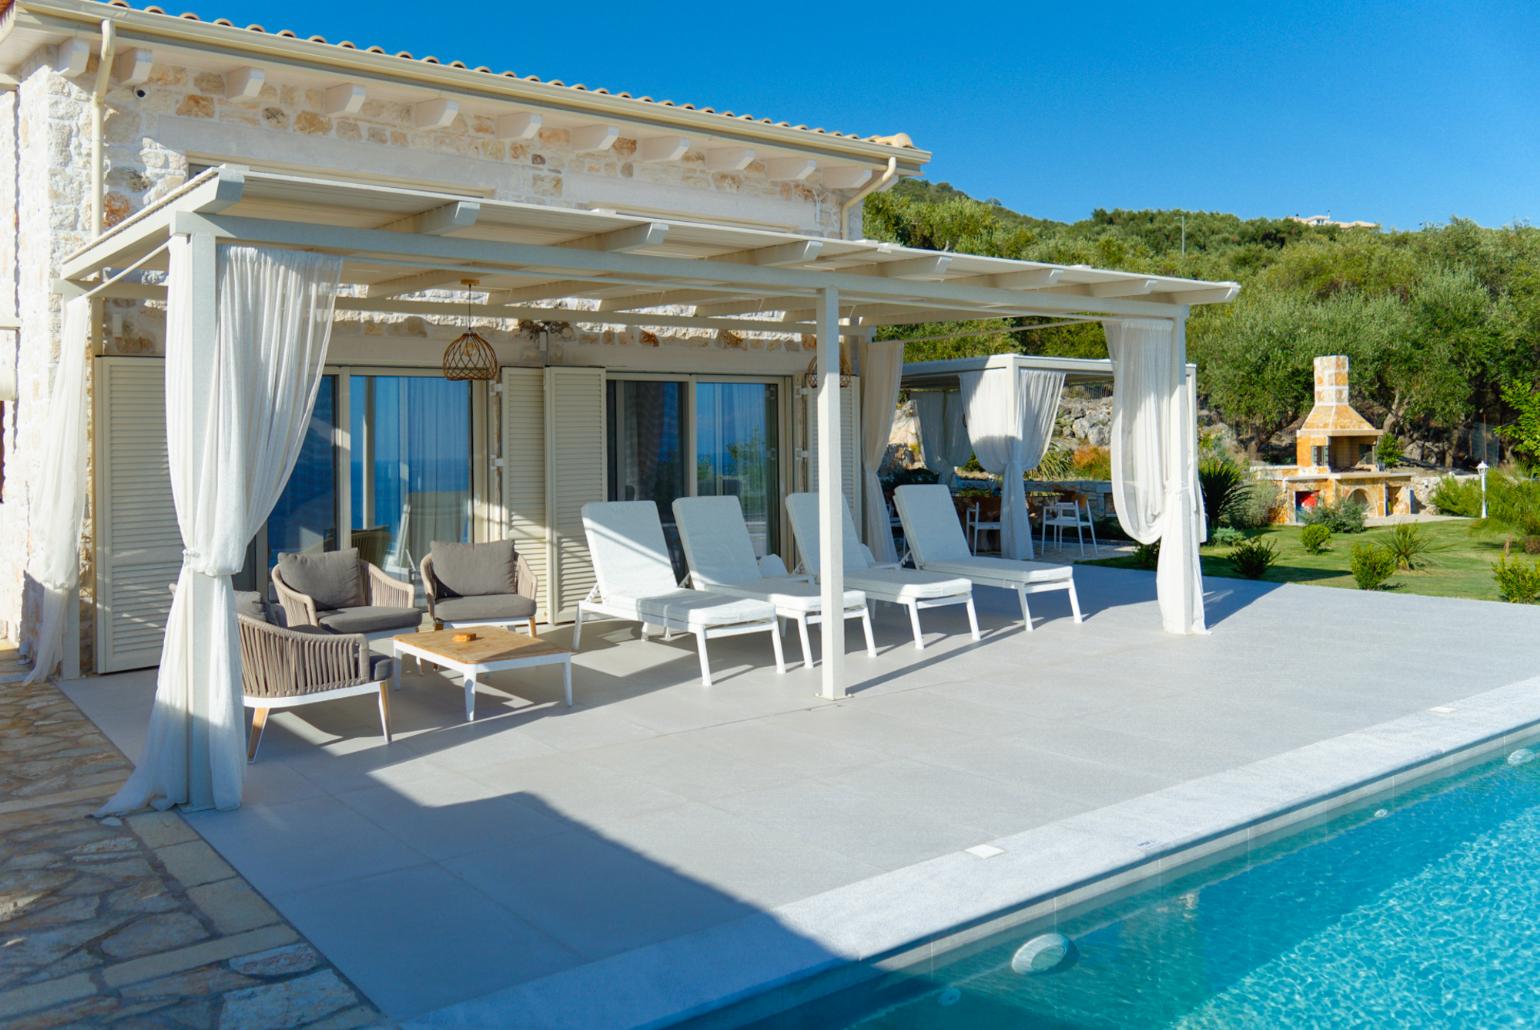 Beautiful villa with private infinity pool and terrace with panoramic sea views